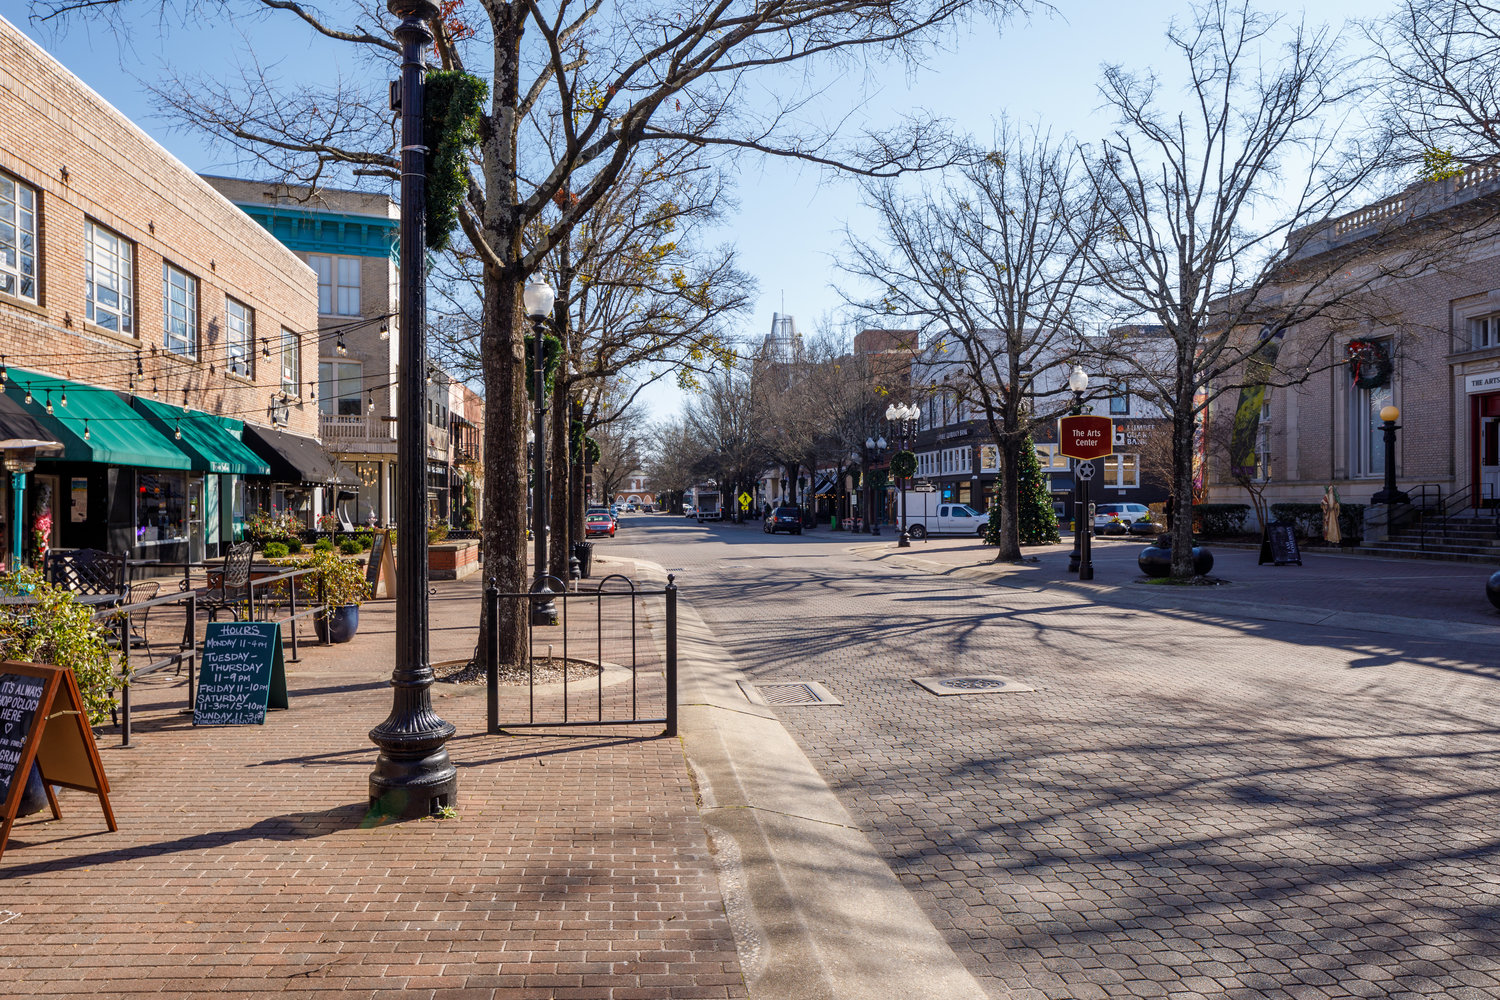 The city of Fayetteville is asking people to share their ideas for expanding the downtown feel beyond Hay Street and making it more of a district experience. A community meeting is scheduled for Thursday at the Arts Center.